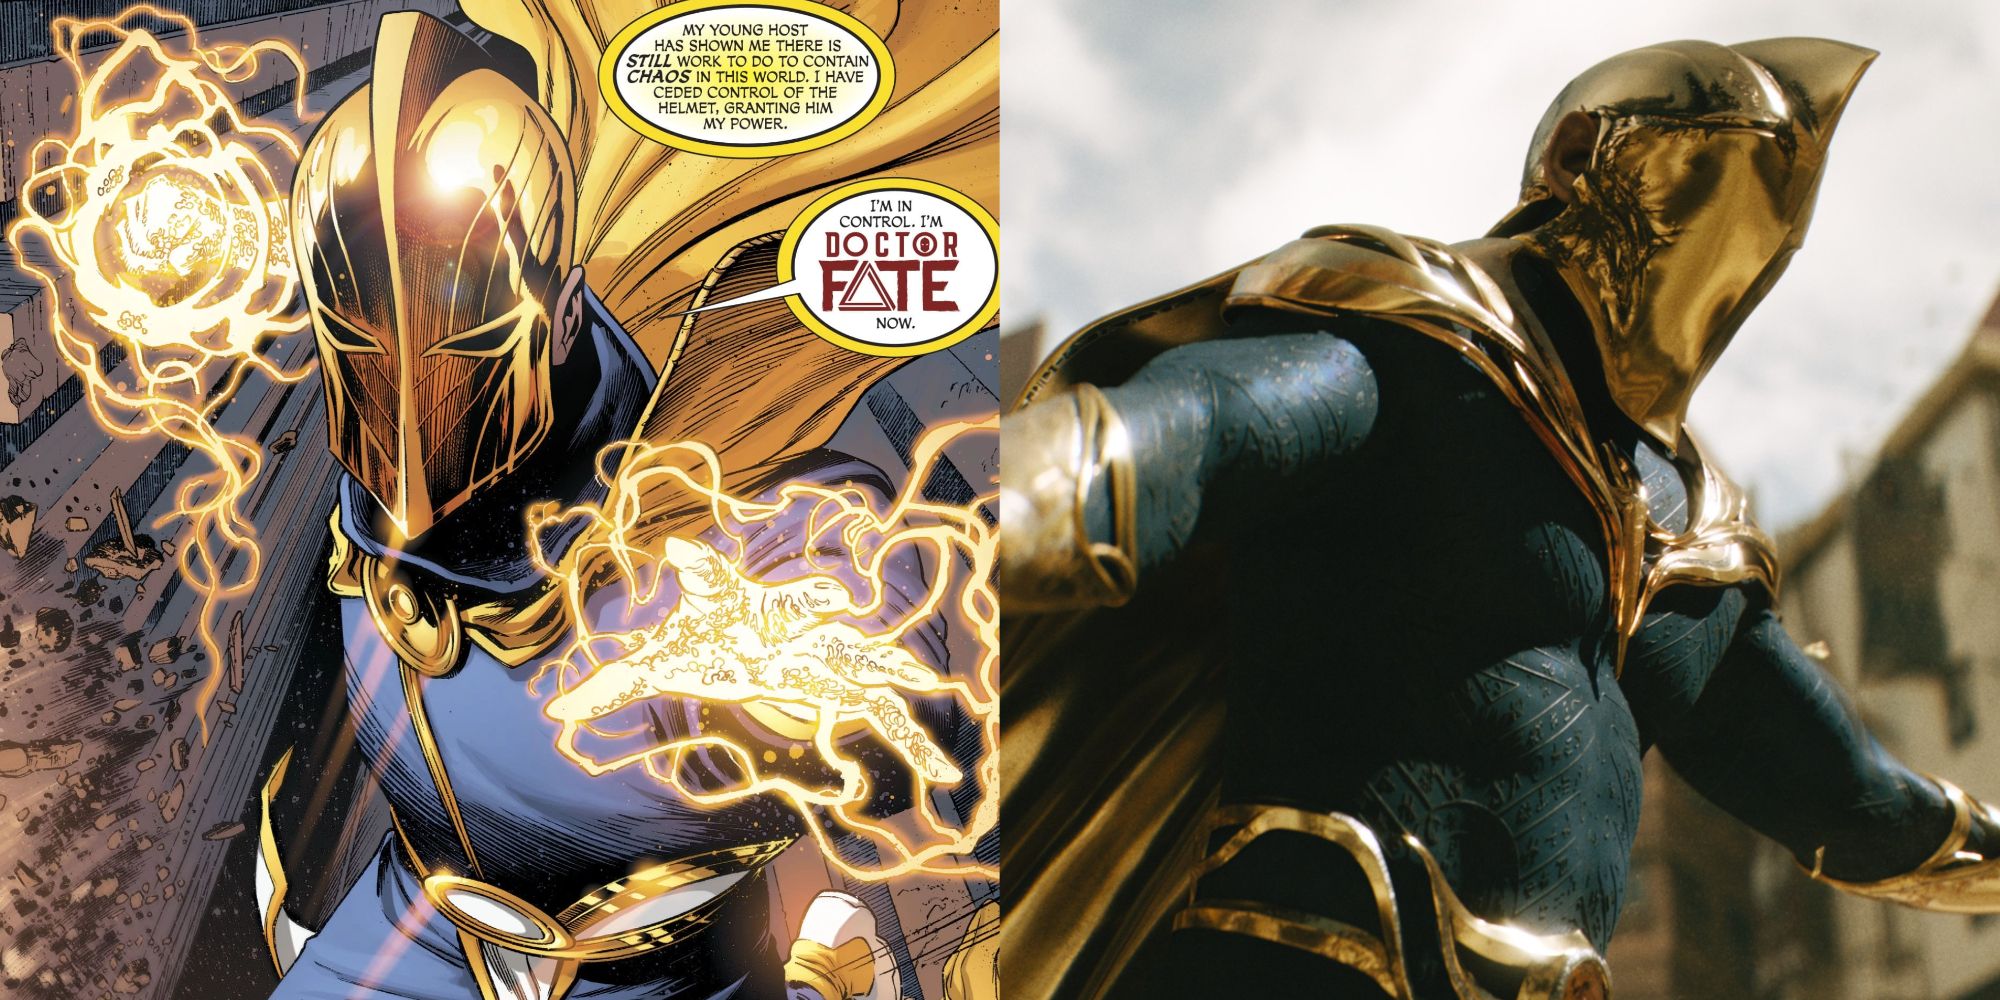 Split image of Doctor Fate from DC Comics and Black Adam movie.